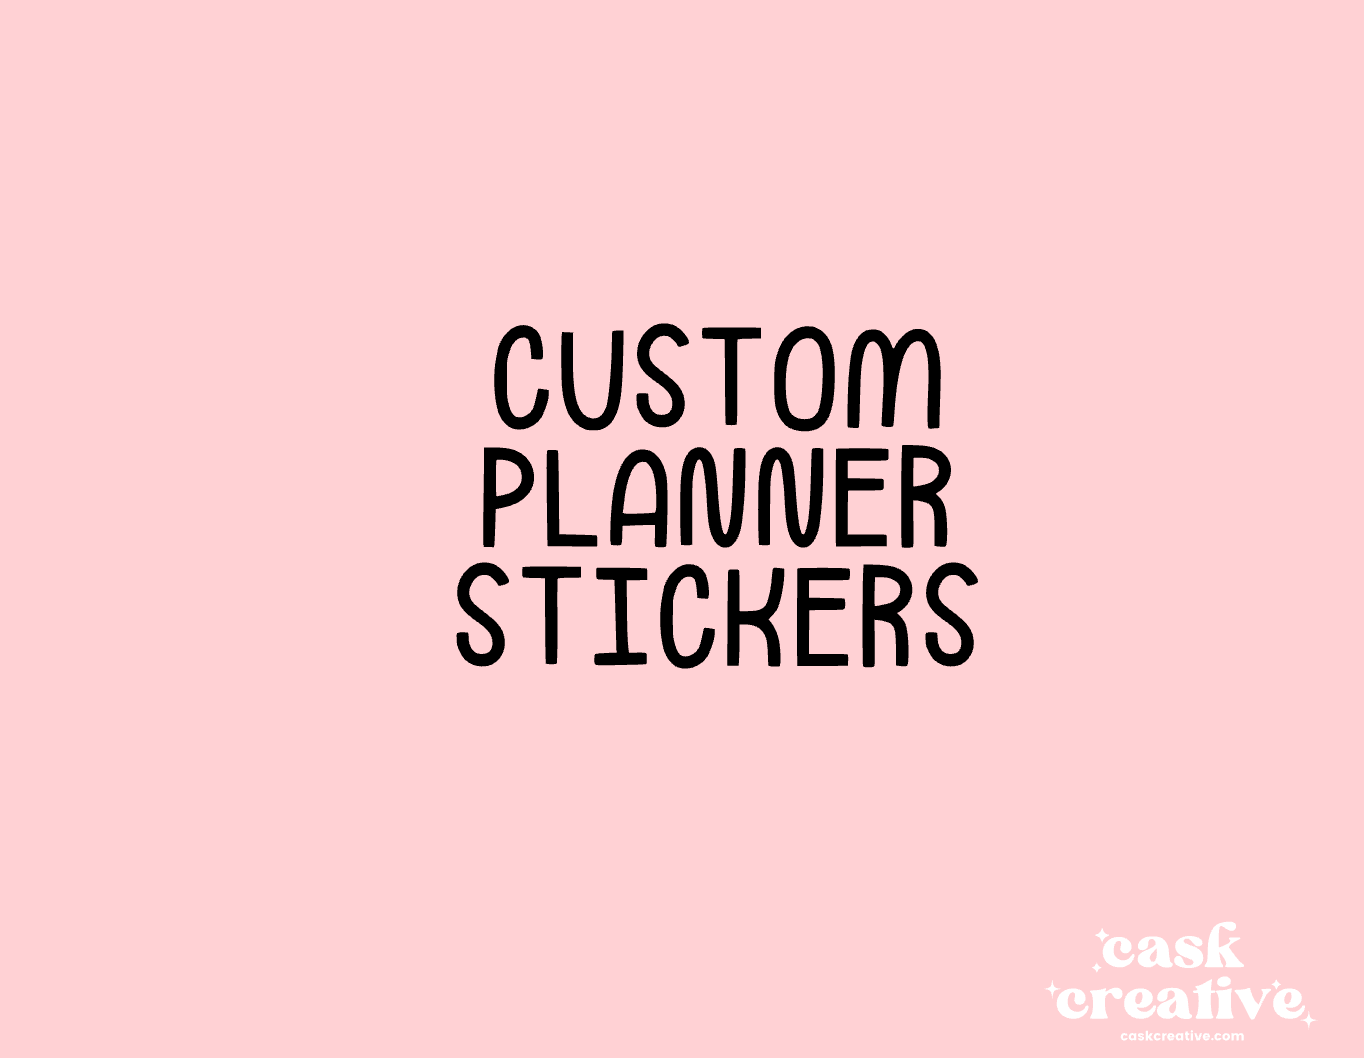 Custom Planner Stickers: Custom designed stickers for your planner